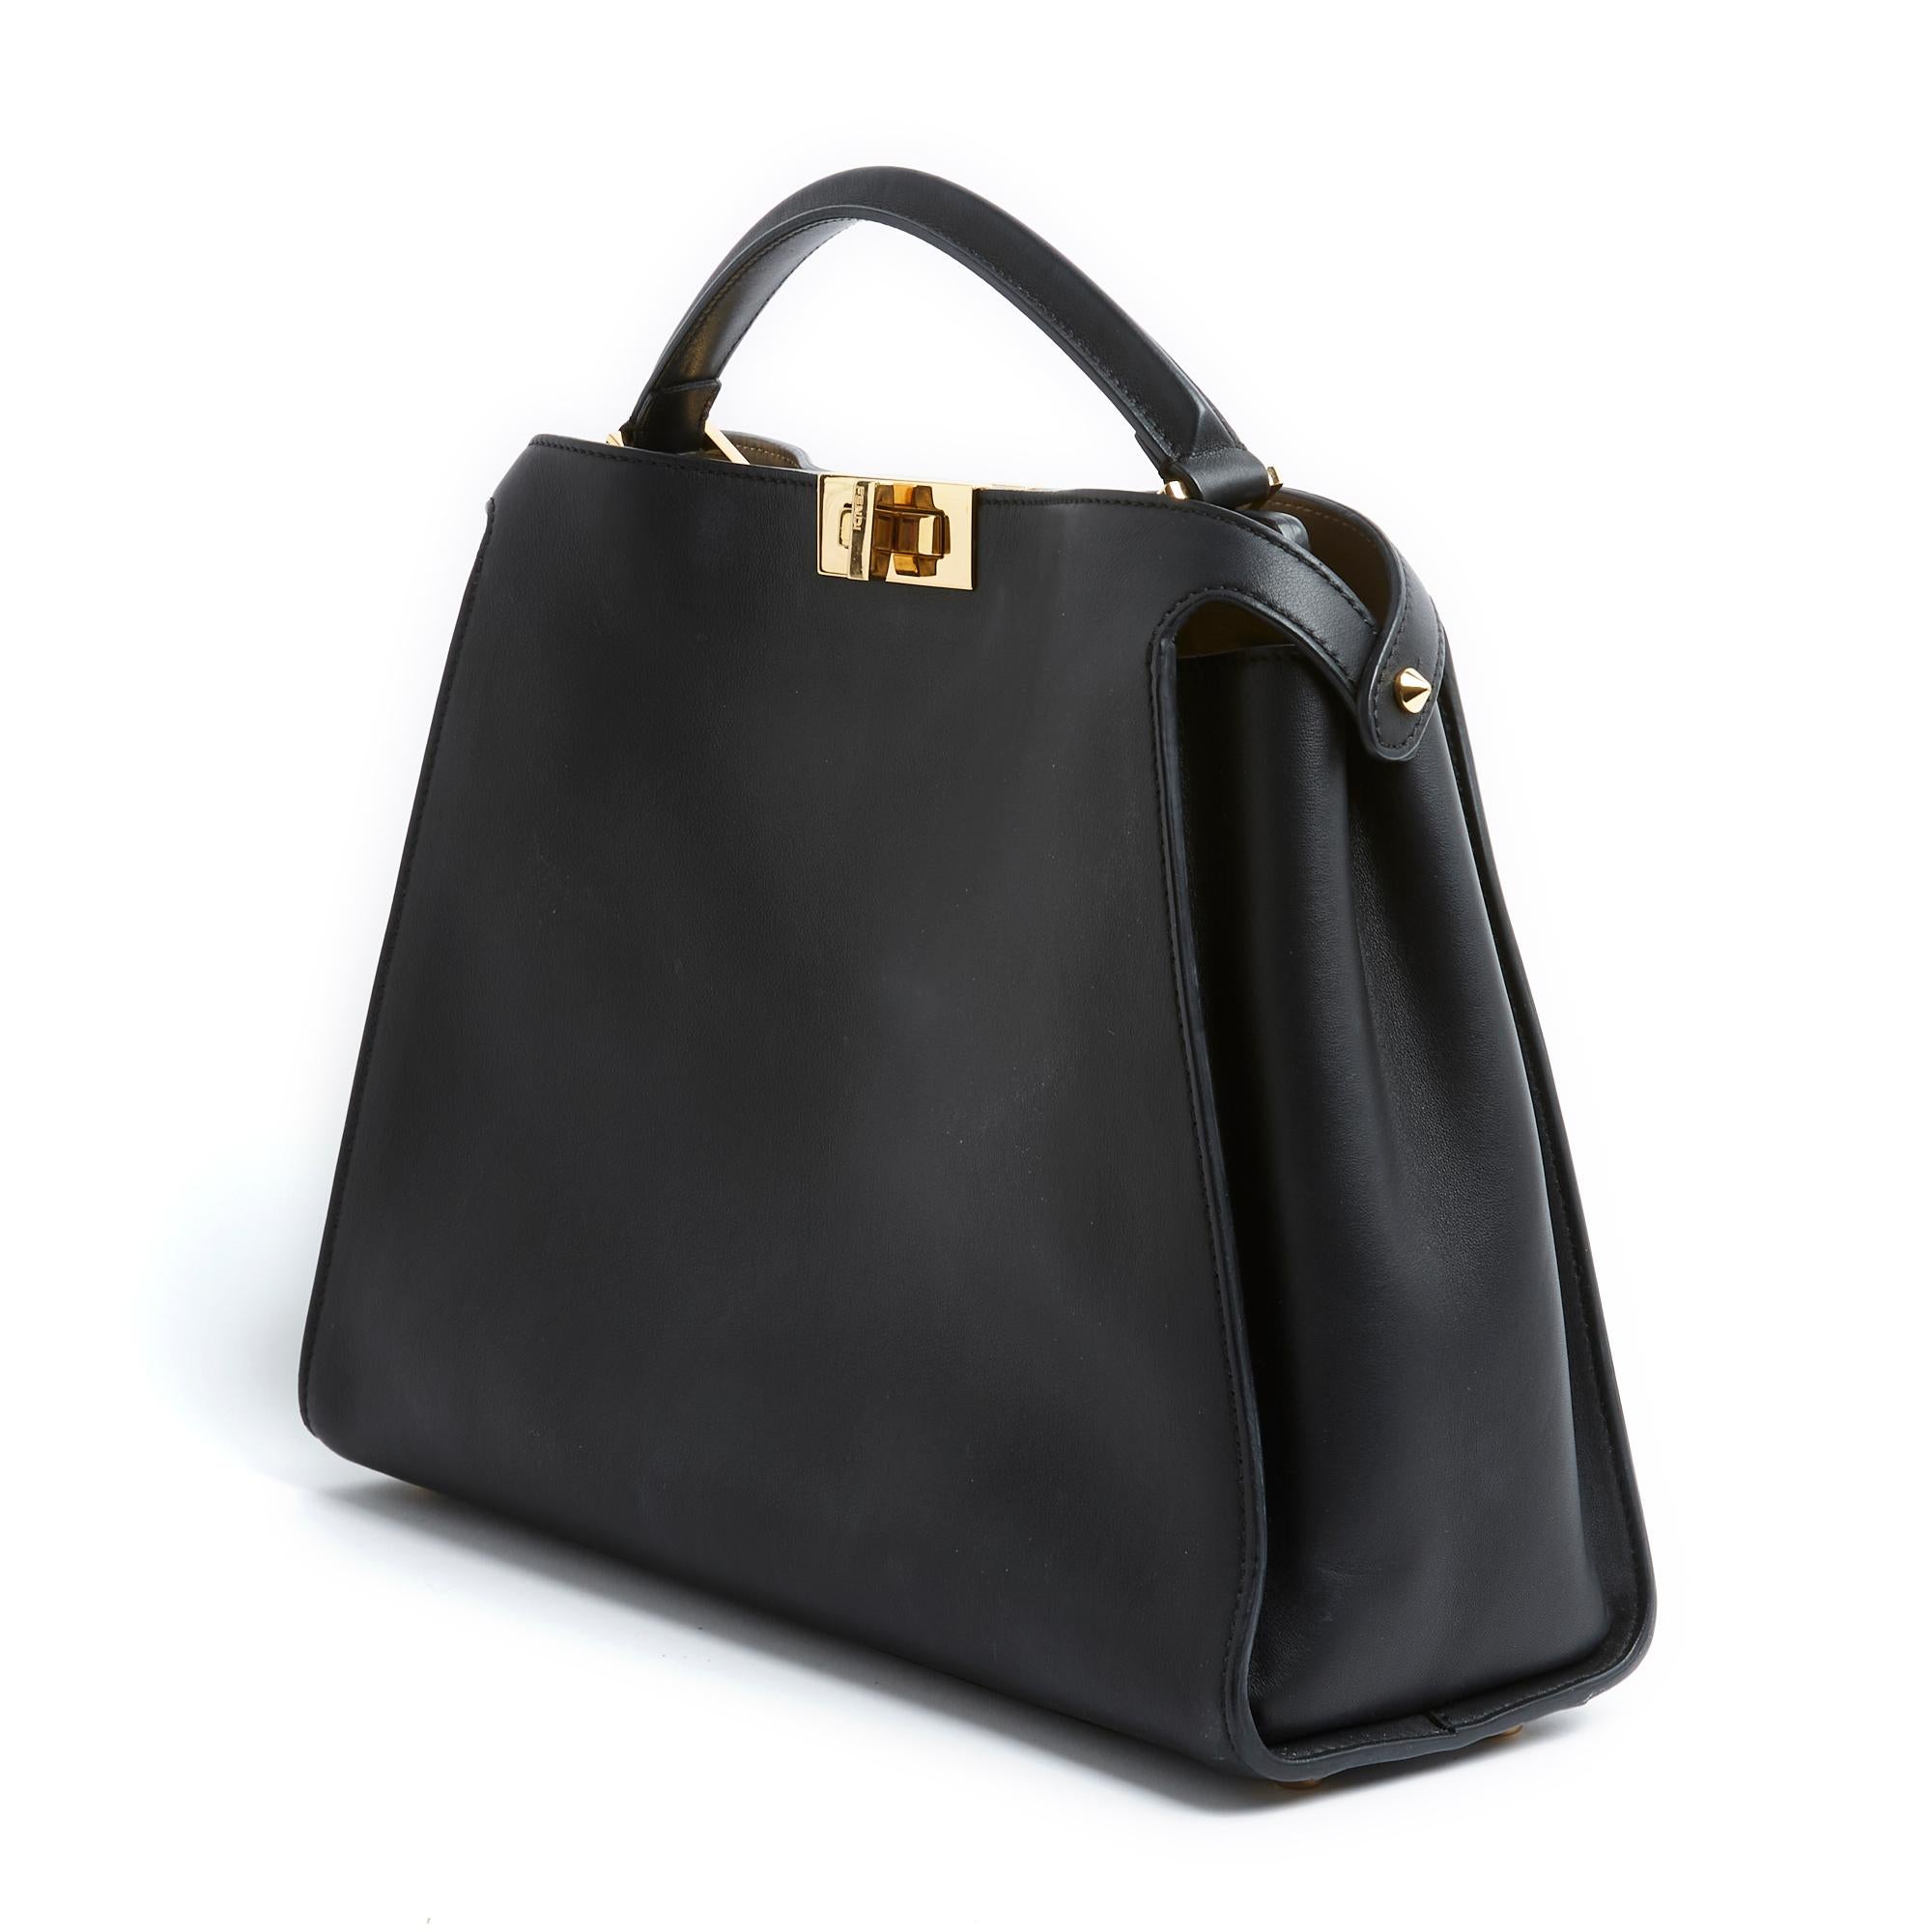 Fendi Large Peekaboo model bag in soft black leather, interior in taupe beige leather, one side of which has a large pocket closed with a zip, gold metal swivel clasps, handle for carrying in the hand and wide removable shoulder strap in matching